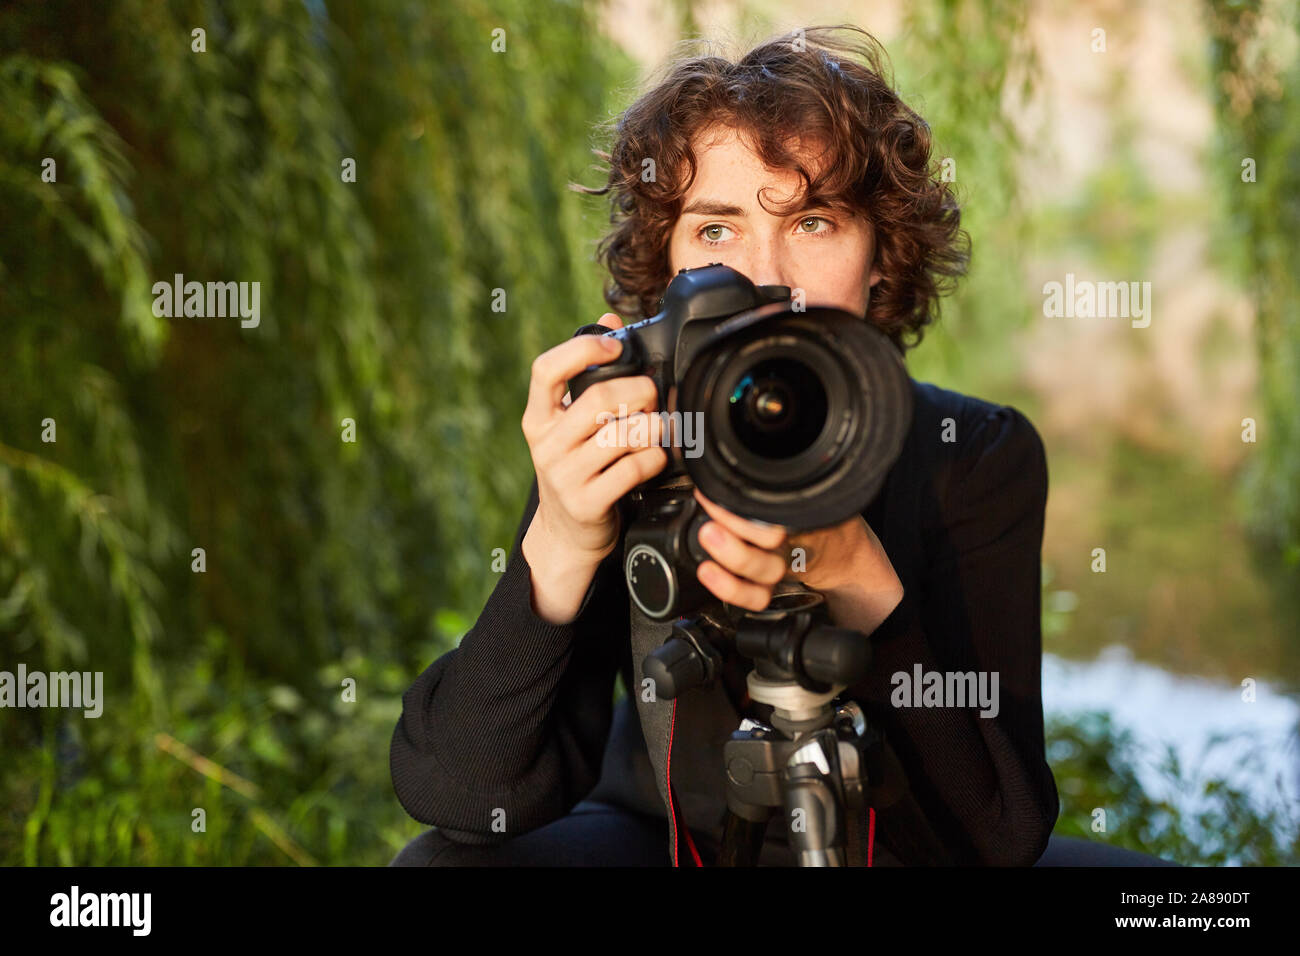 Woman as nature photographer with digital camera makes landscape photography Stock Photo